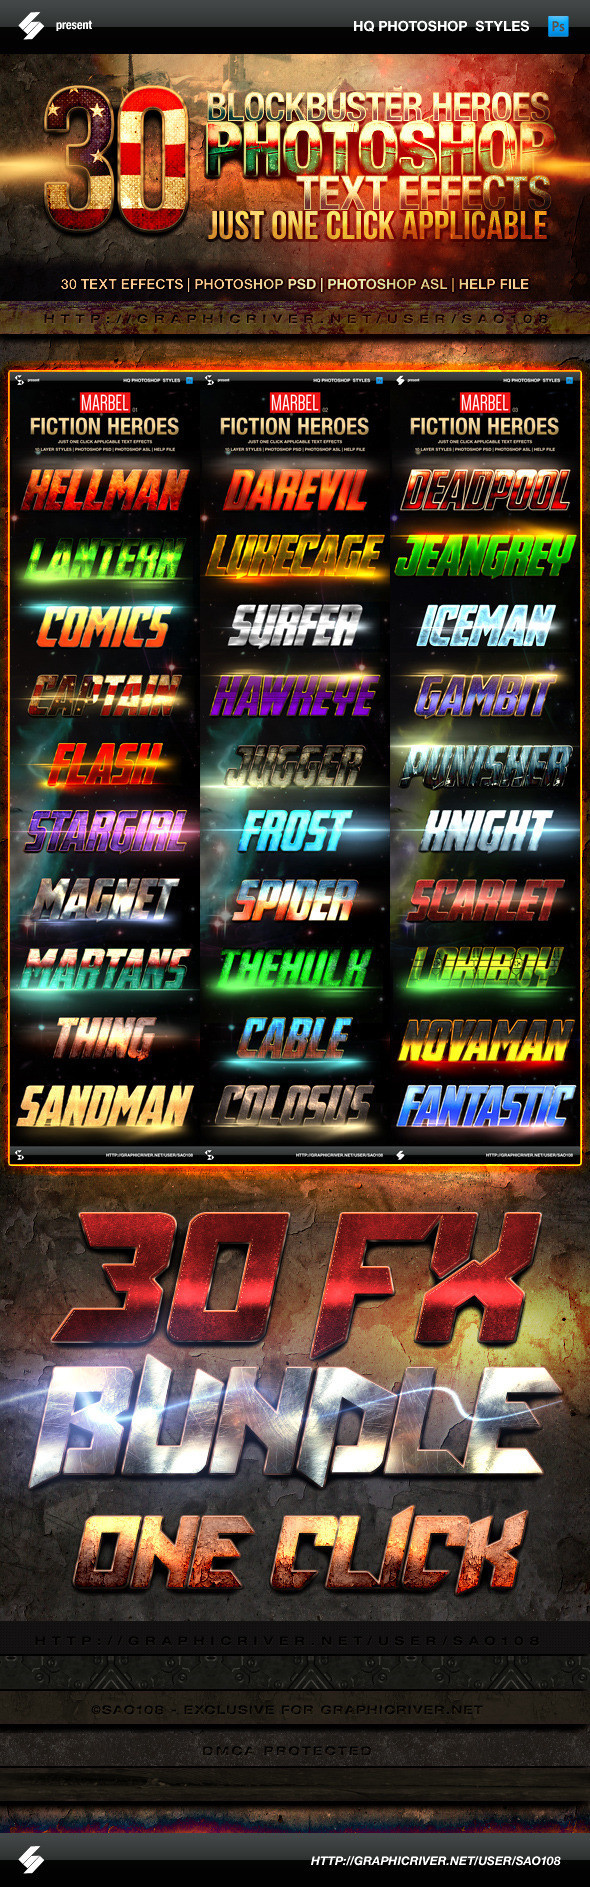 Blockbuster heroes style texteffects bundle preview